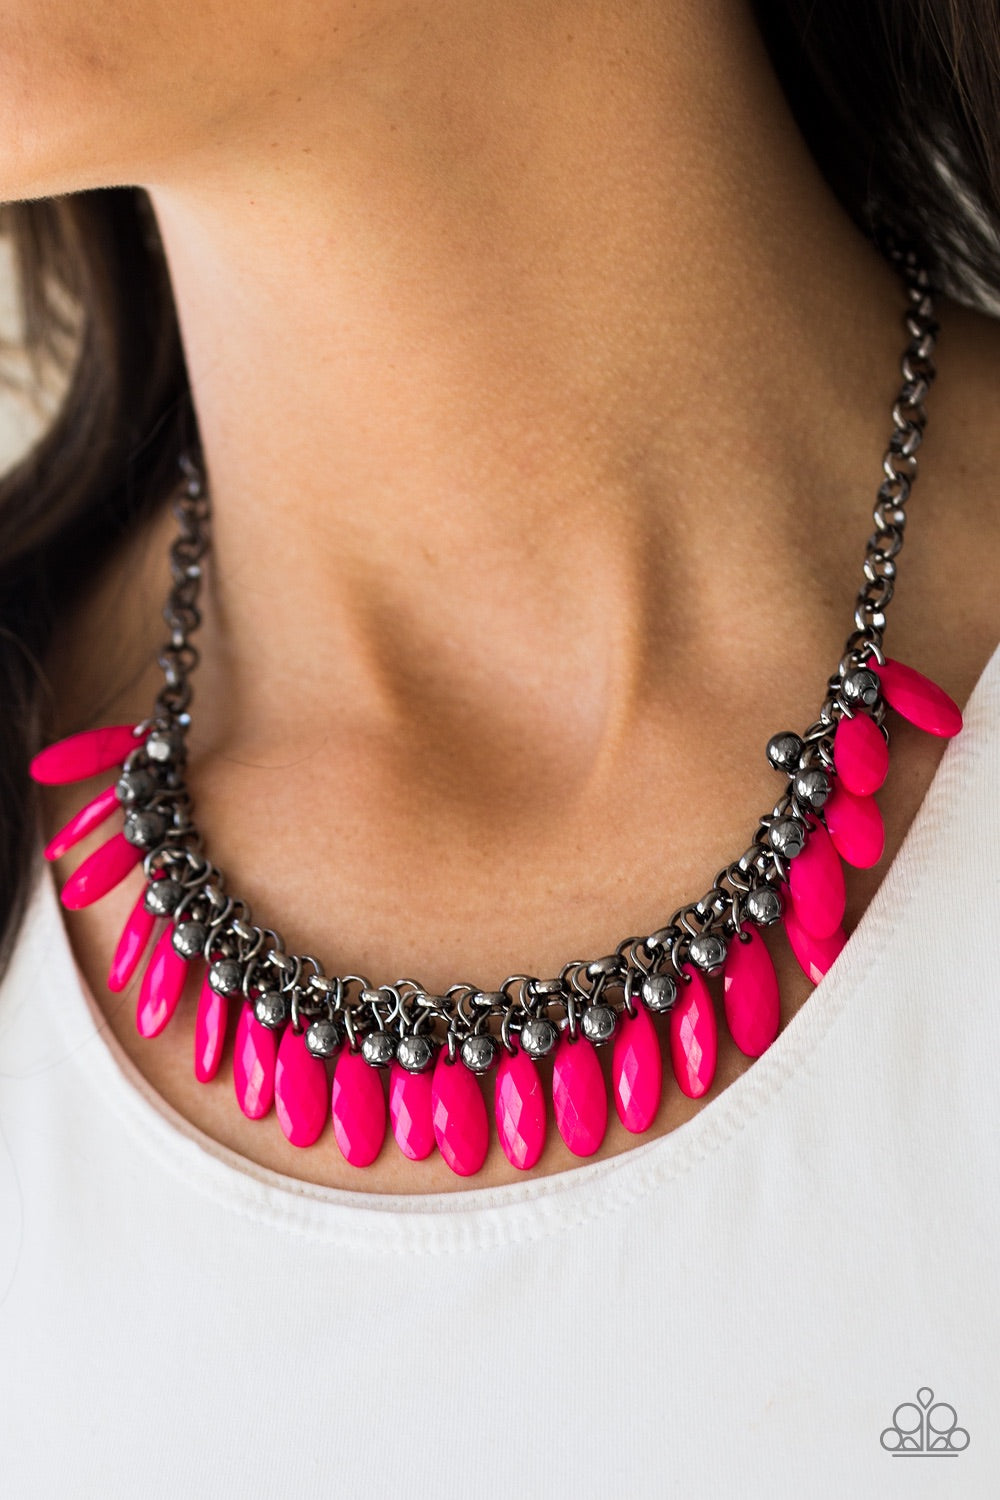 Paparazzi Jewelry Necklace Jersey Shore - Pink